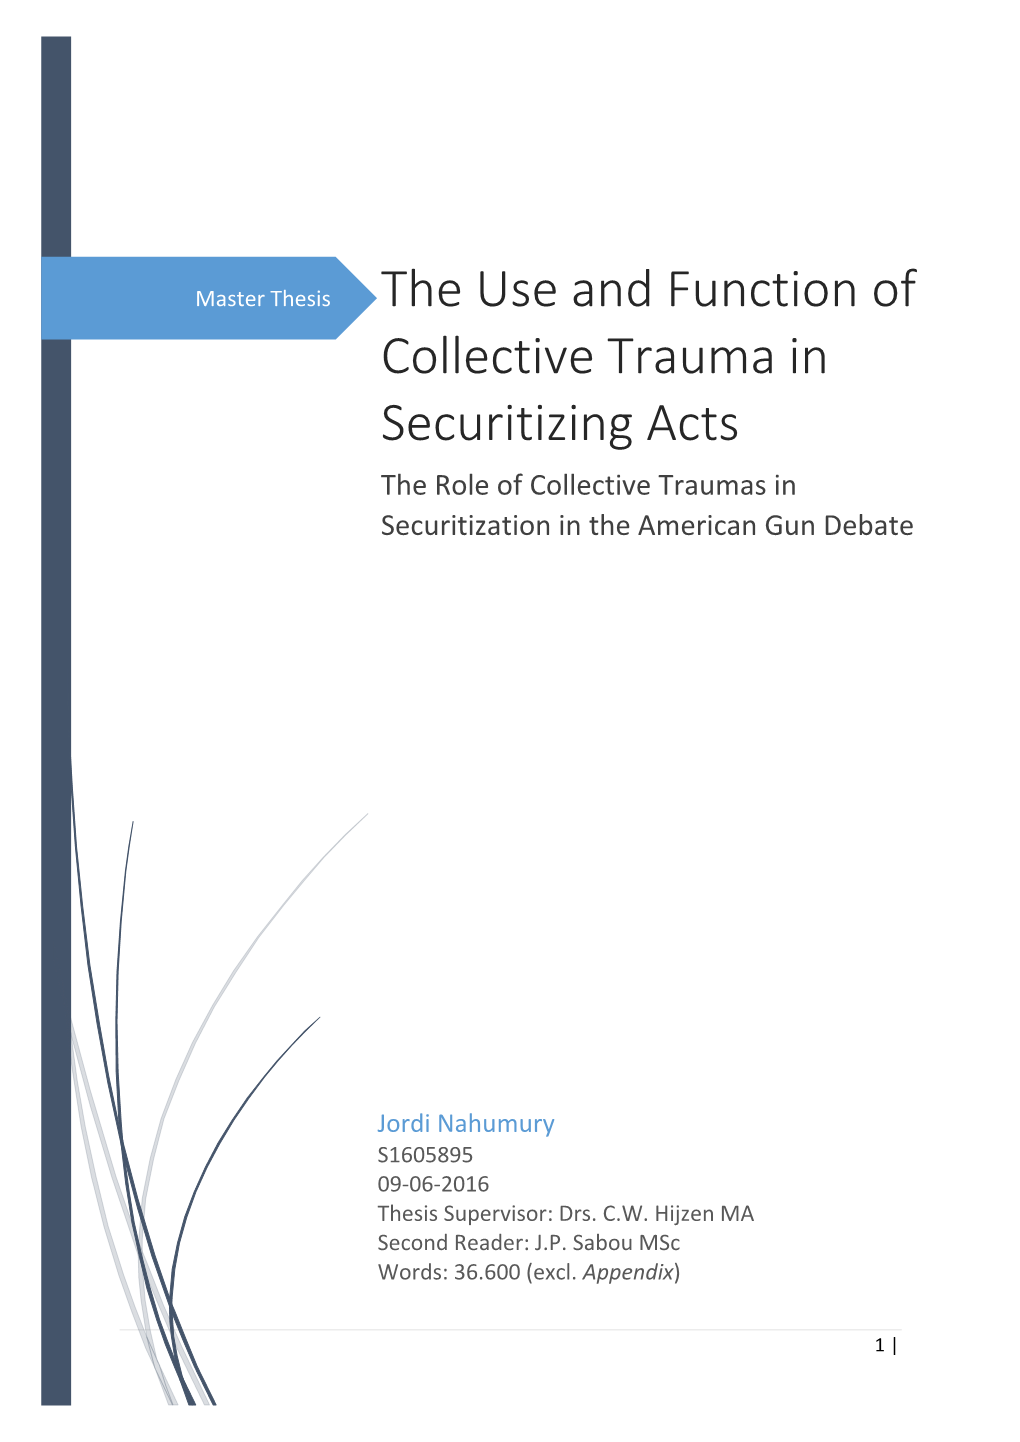 The Use and Function of Collective Trauma in Securitizing Acts the Role of Collective Traumas in Securitization in the American Gun Debate